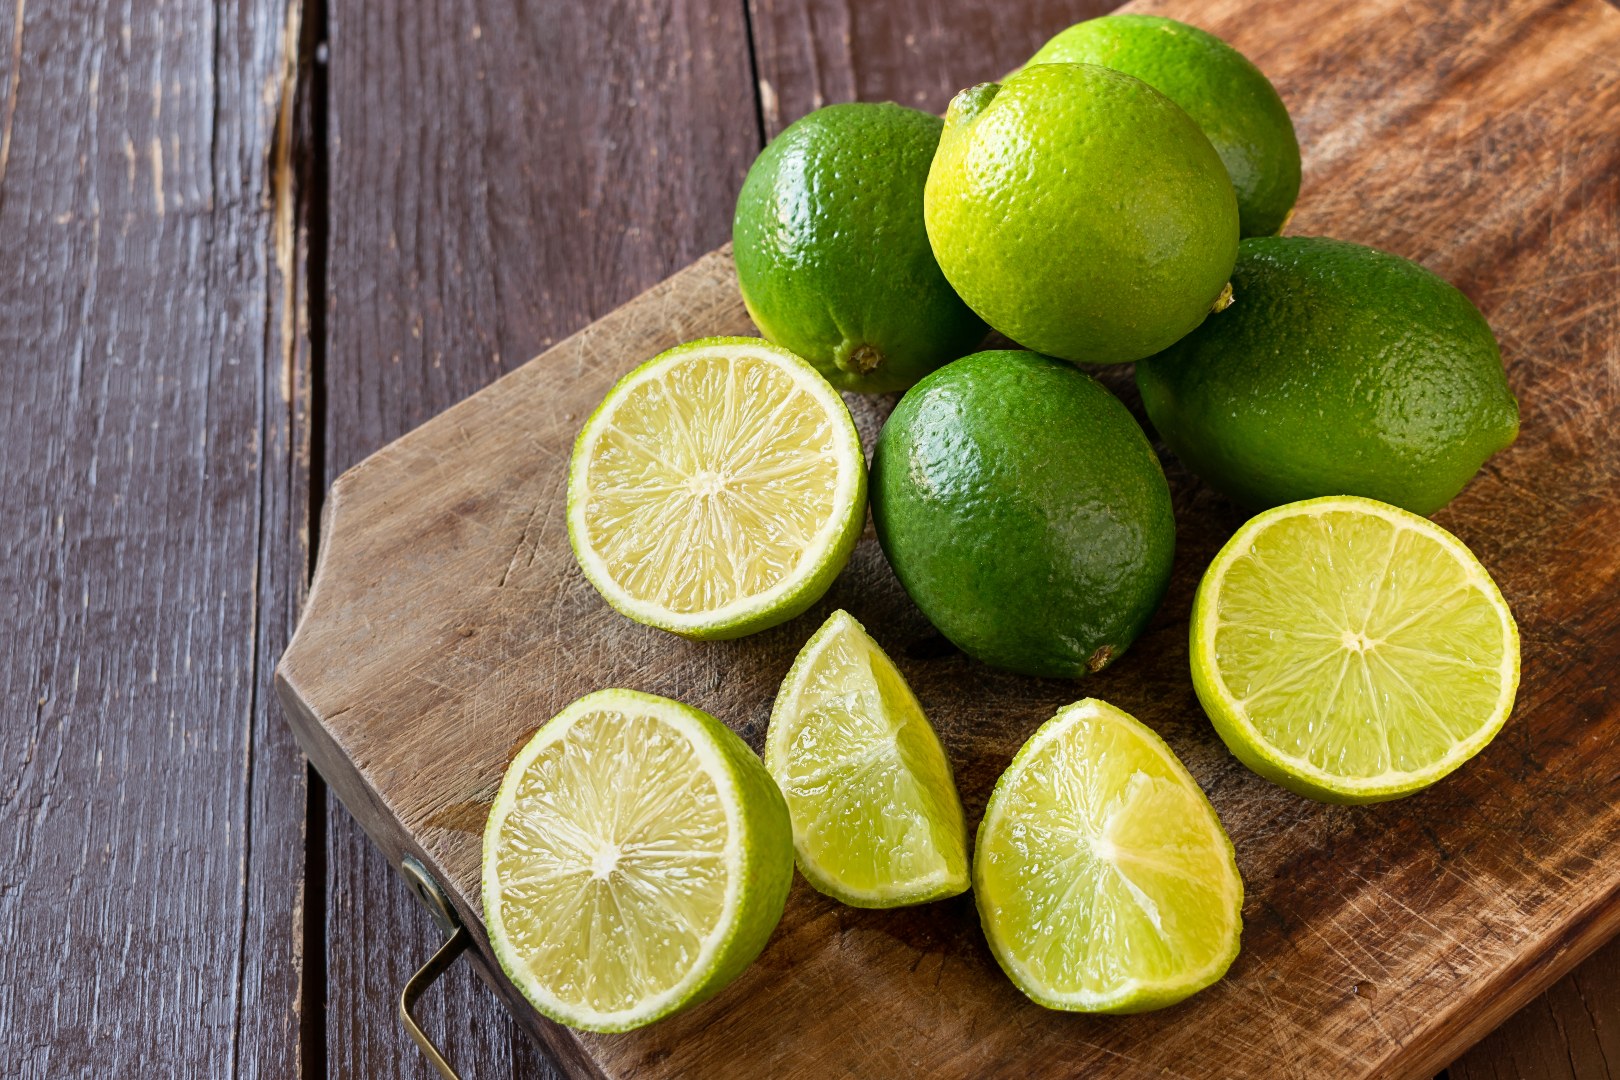 Juicy Tahitian limes grown in Queensland, presented on a chopping board - some halved some whole